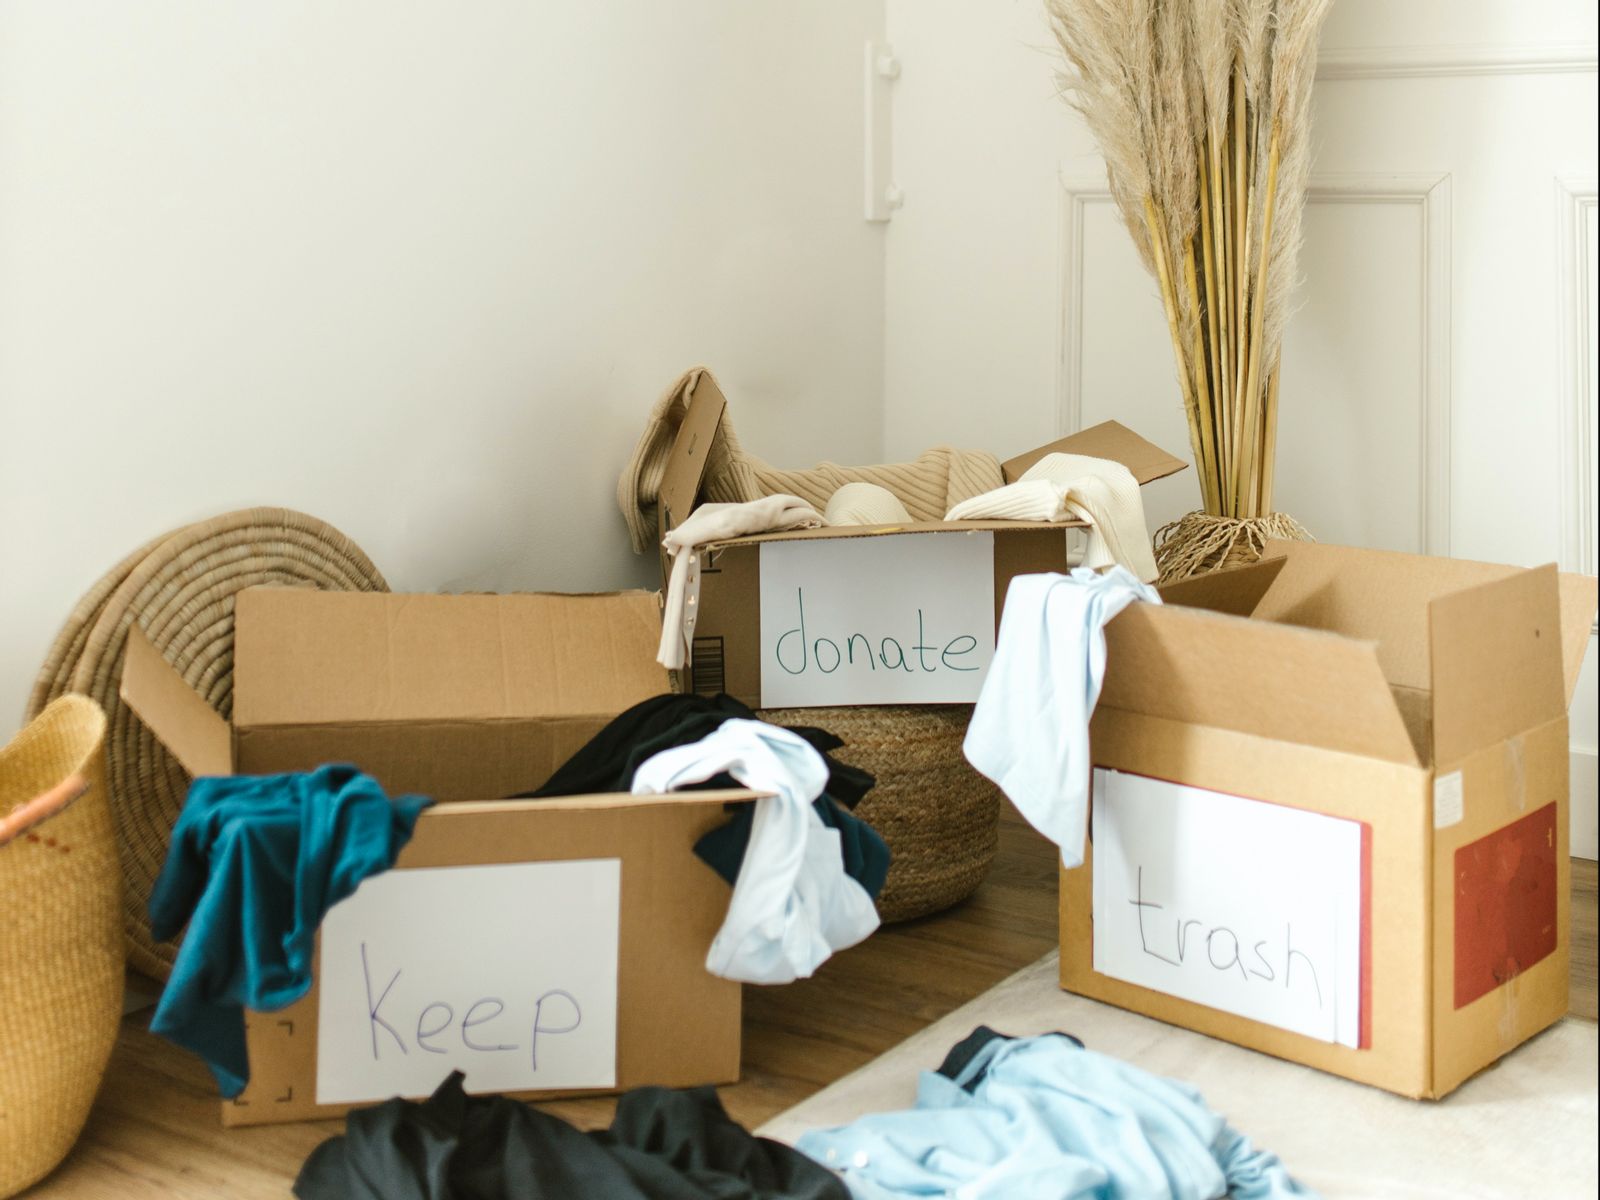 10 Decluttering Tips to Organize Any Room 